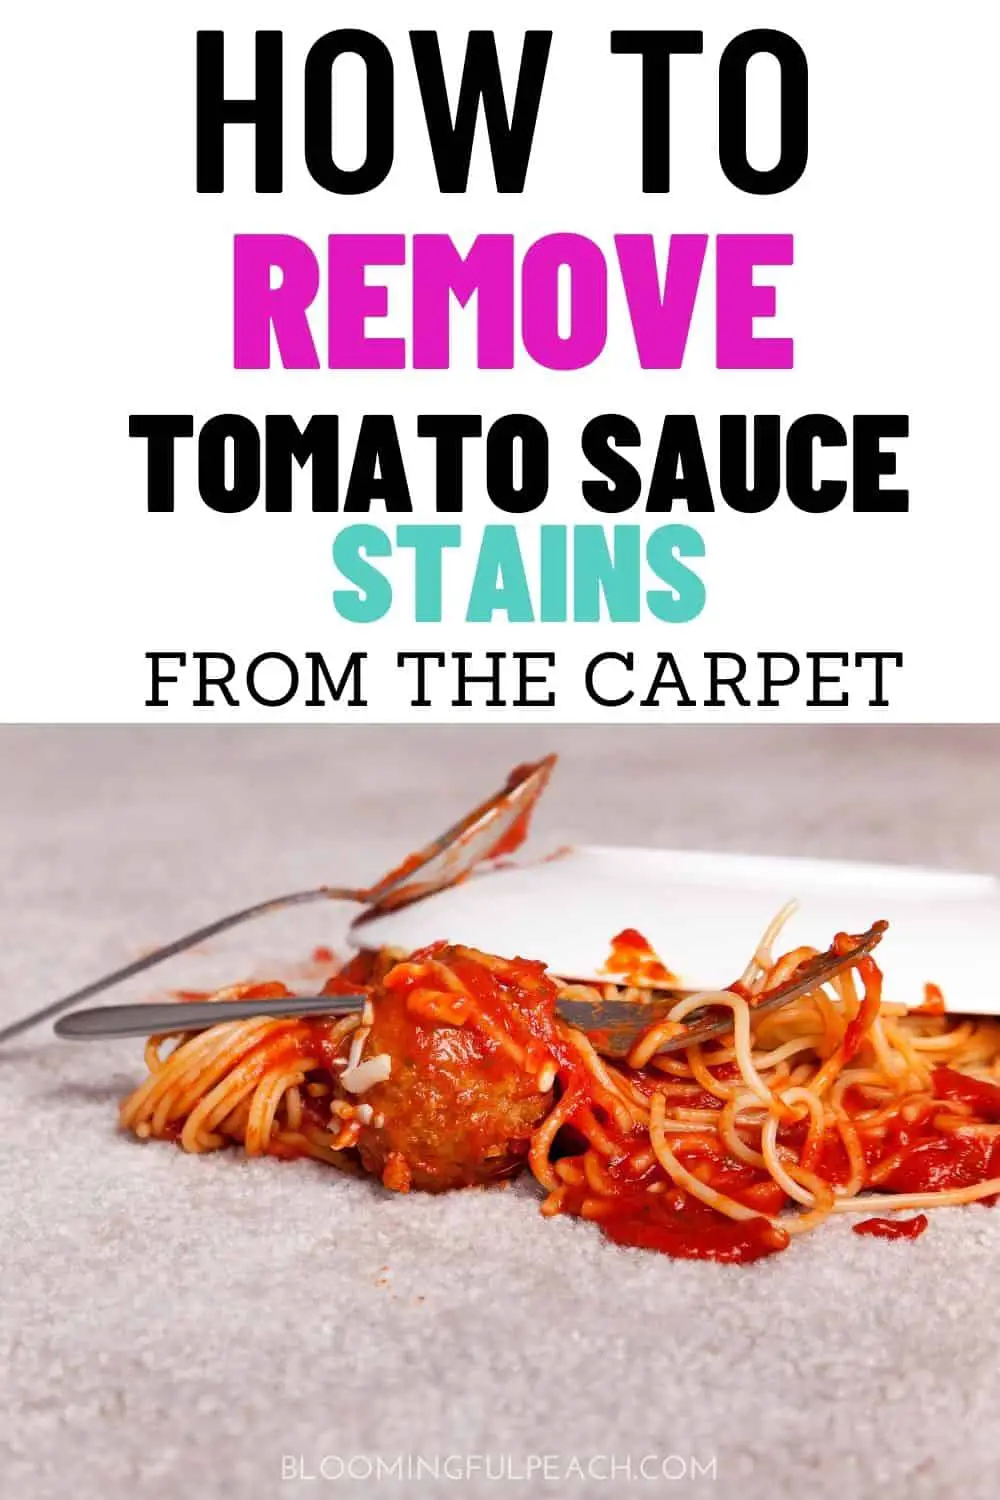 Here Are The Best Ways How To Remove Tomato Sauce Stains